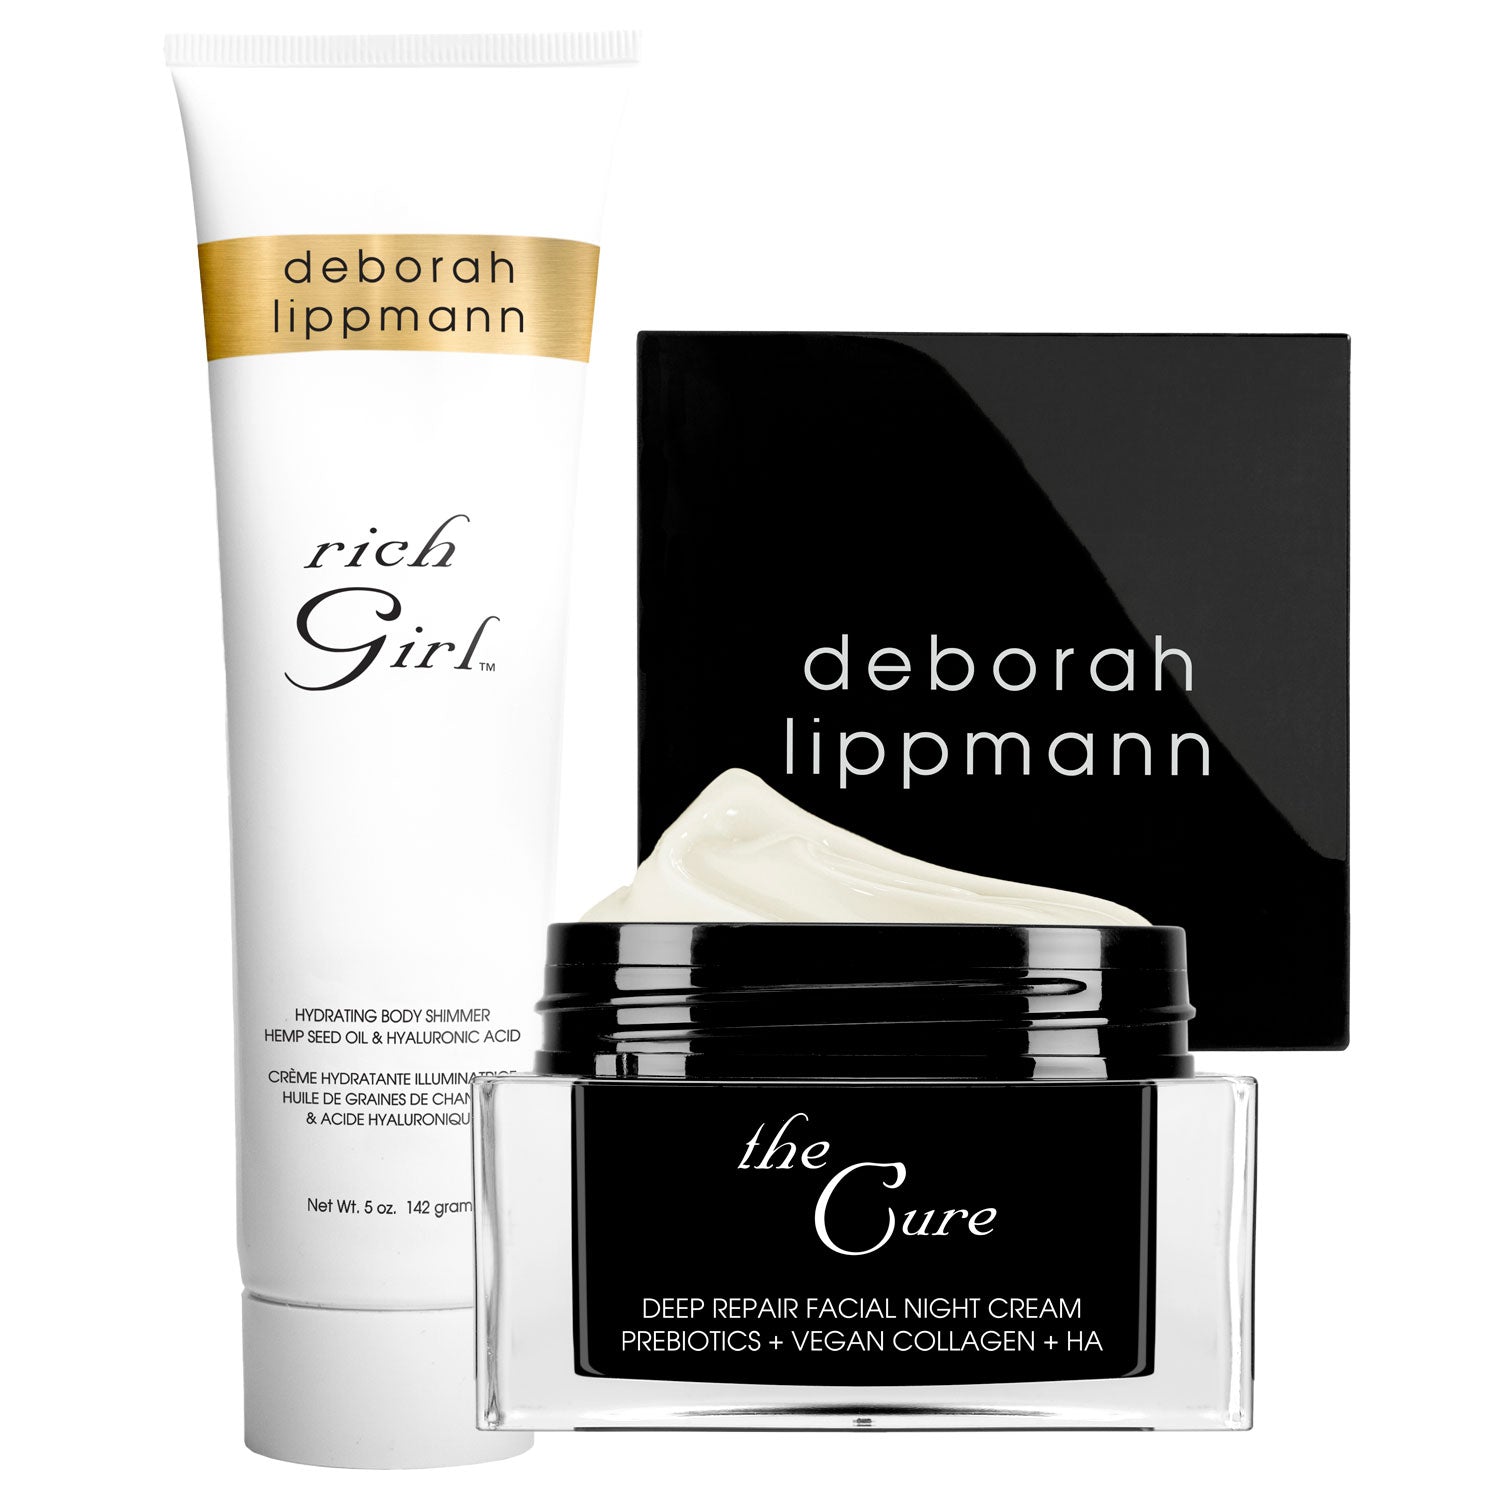 Rich Girl Body Shimmer and The Cure Facial Night Cream